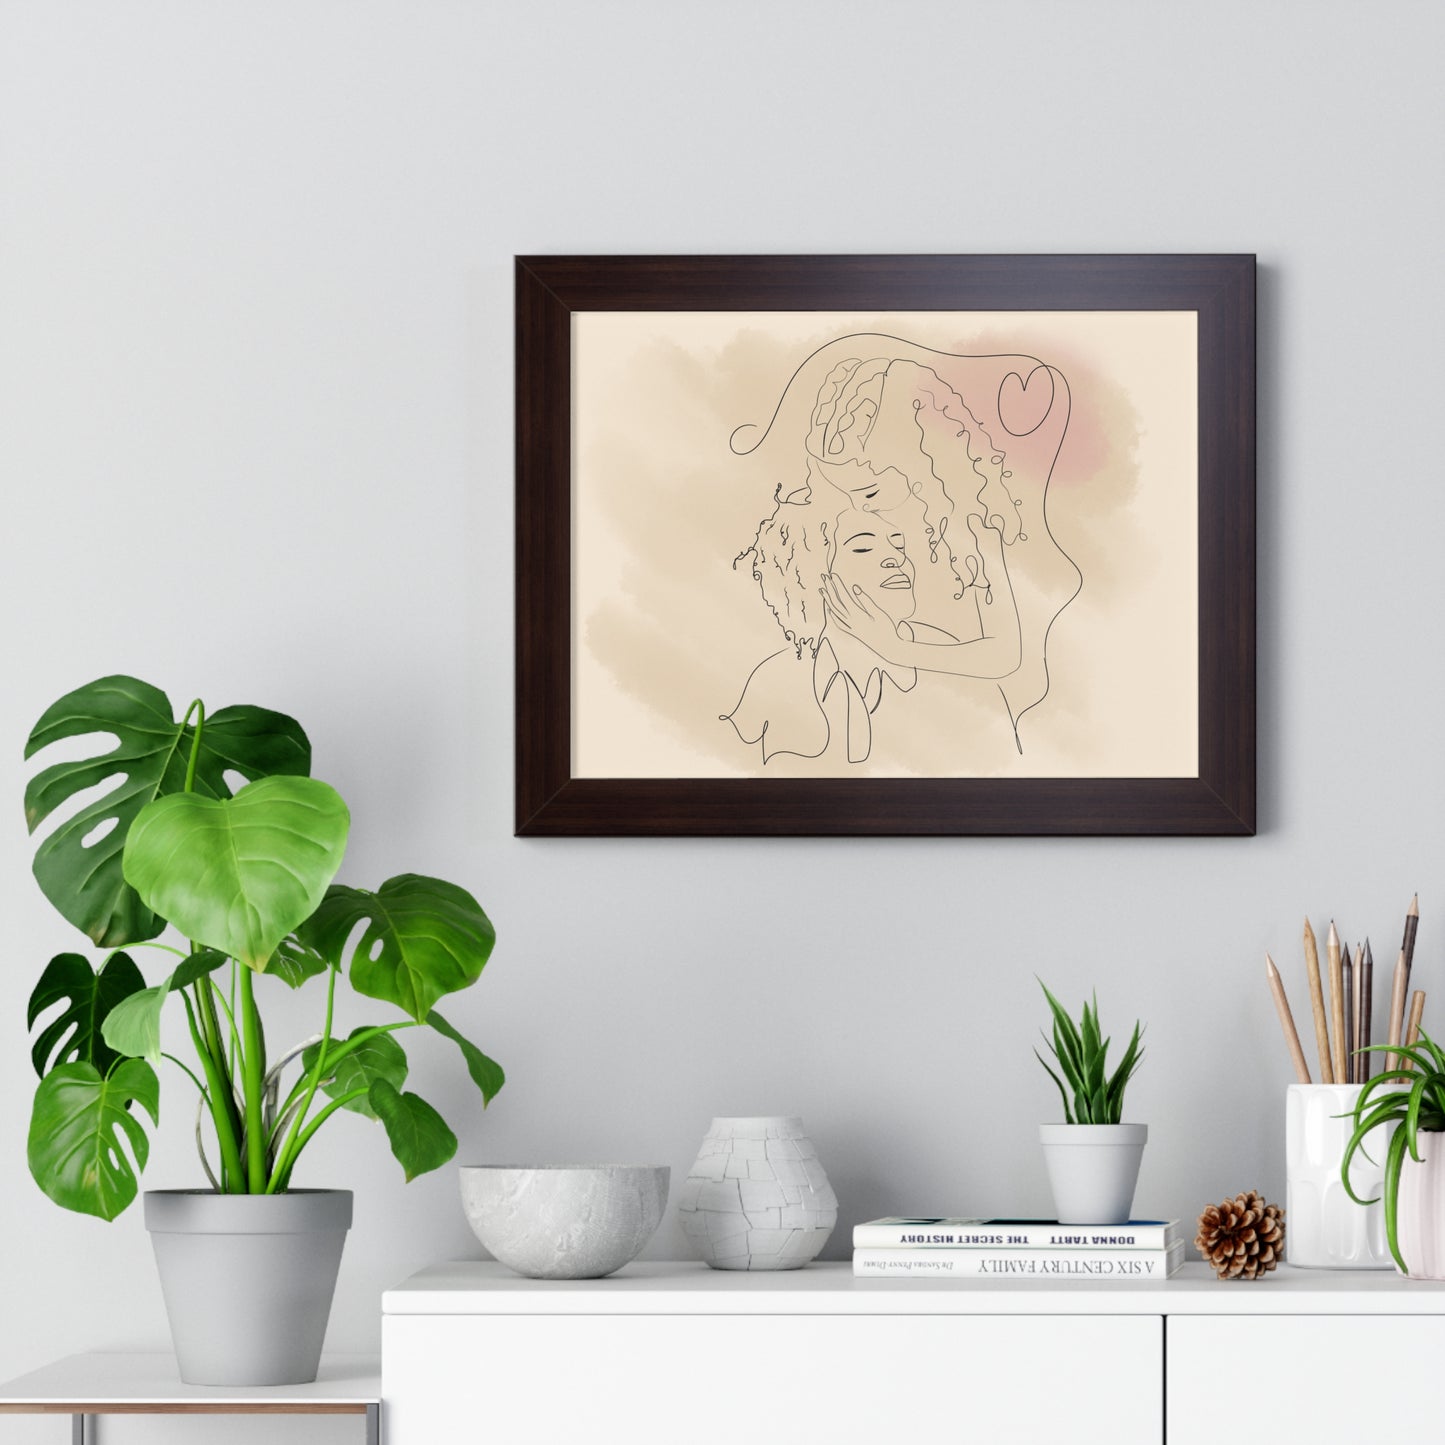 Personalize your Framed Wall Art